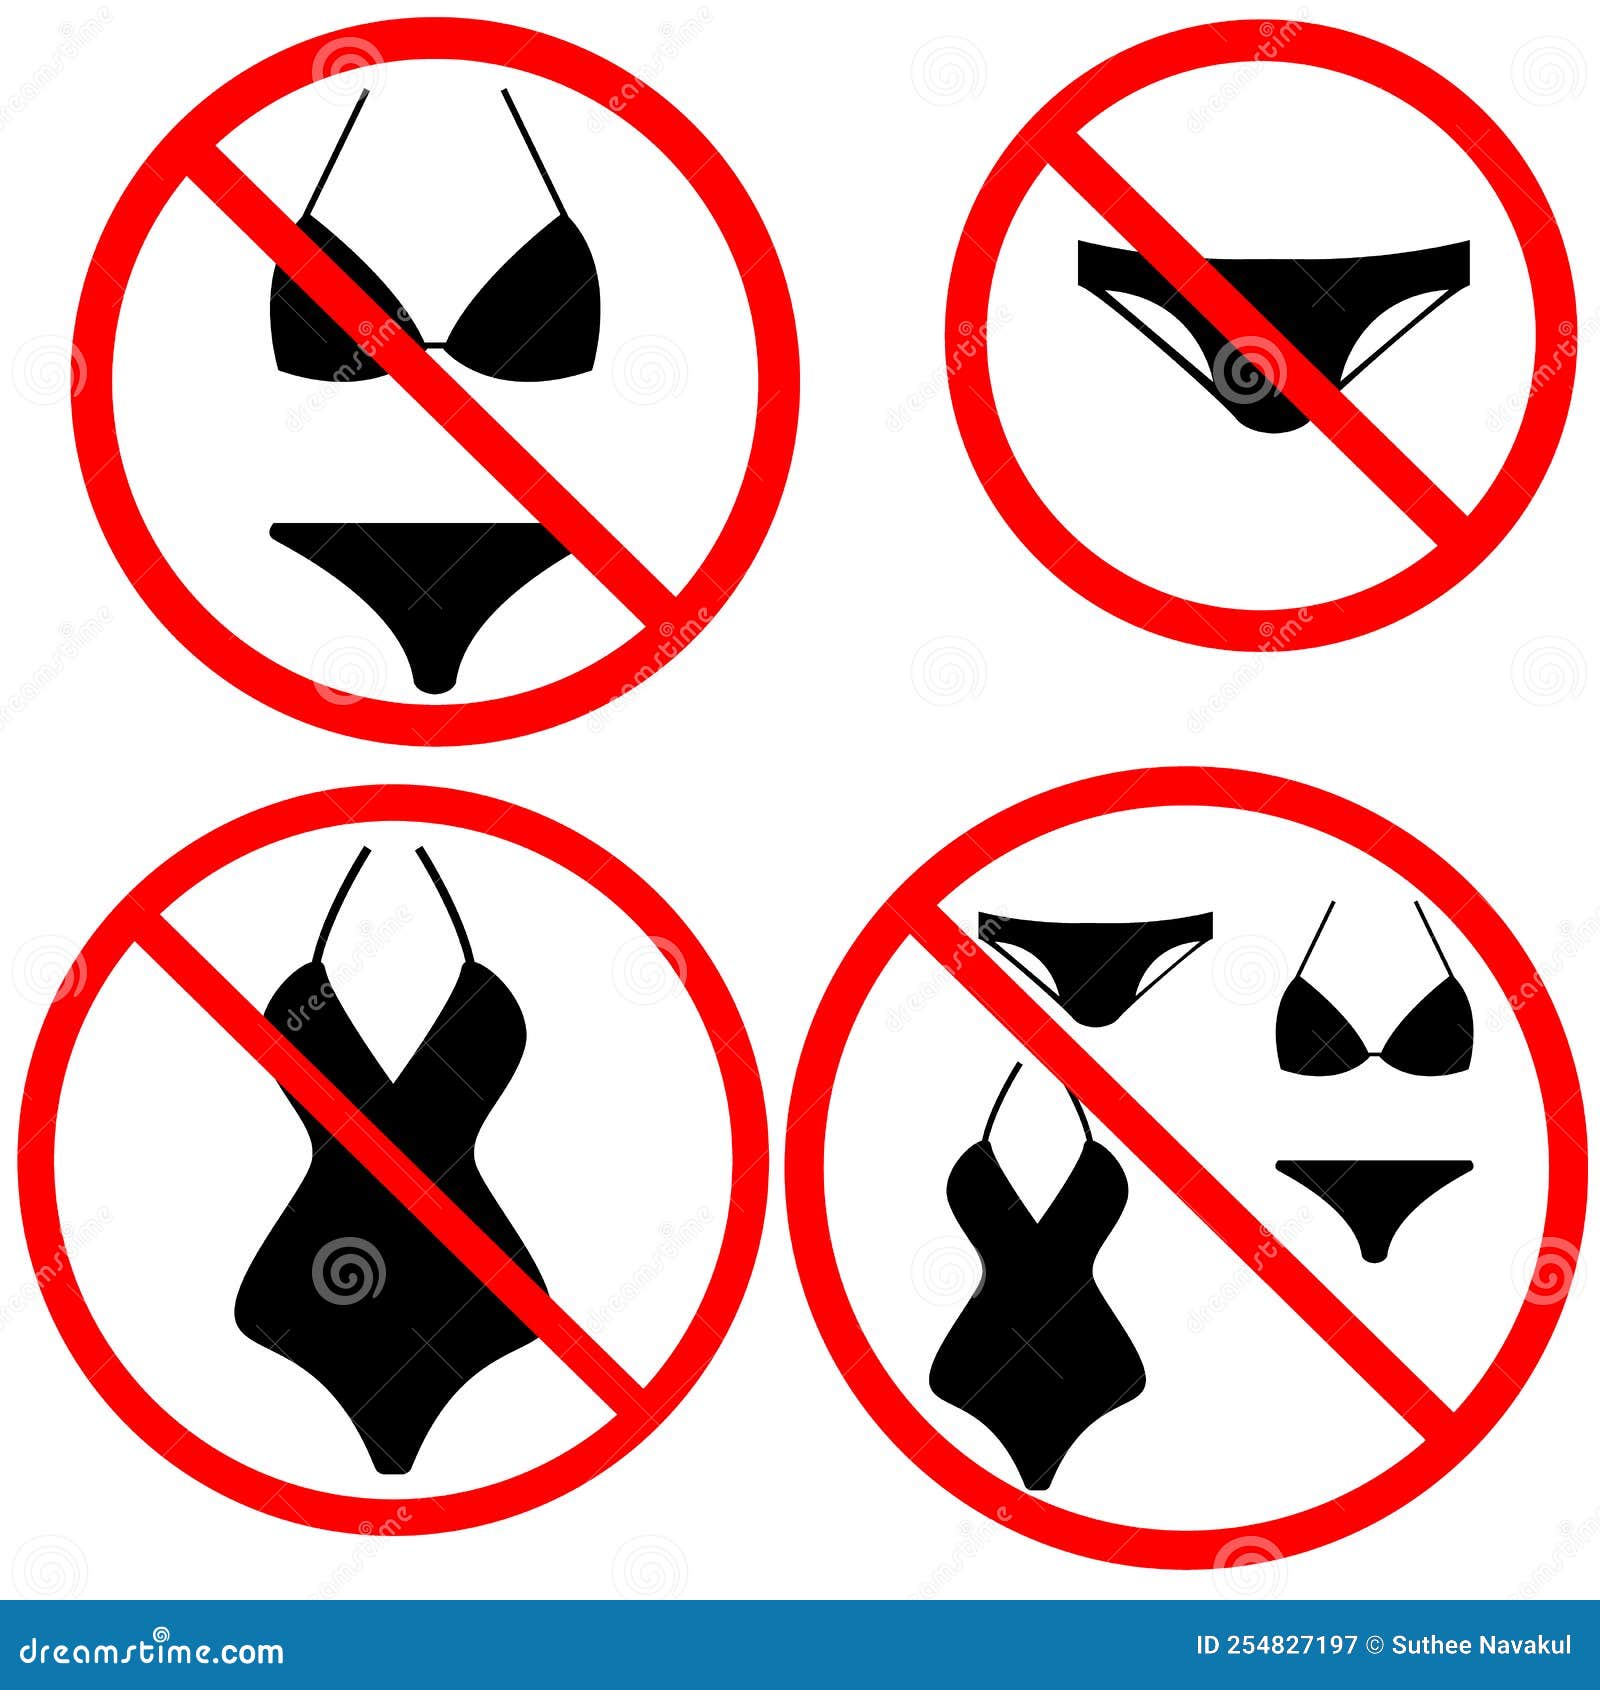 Nude Beach Sign Stock Illustrations image